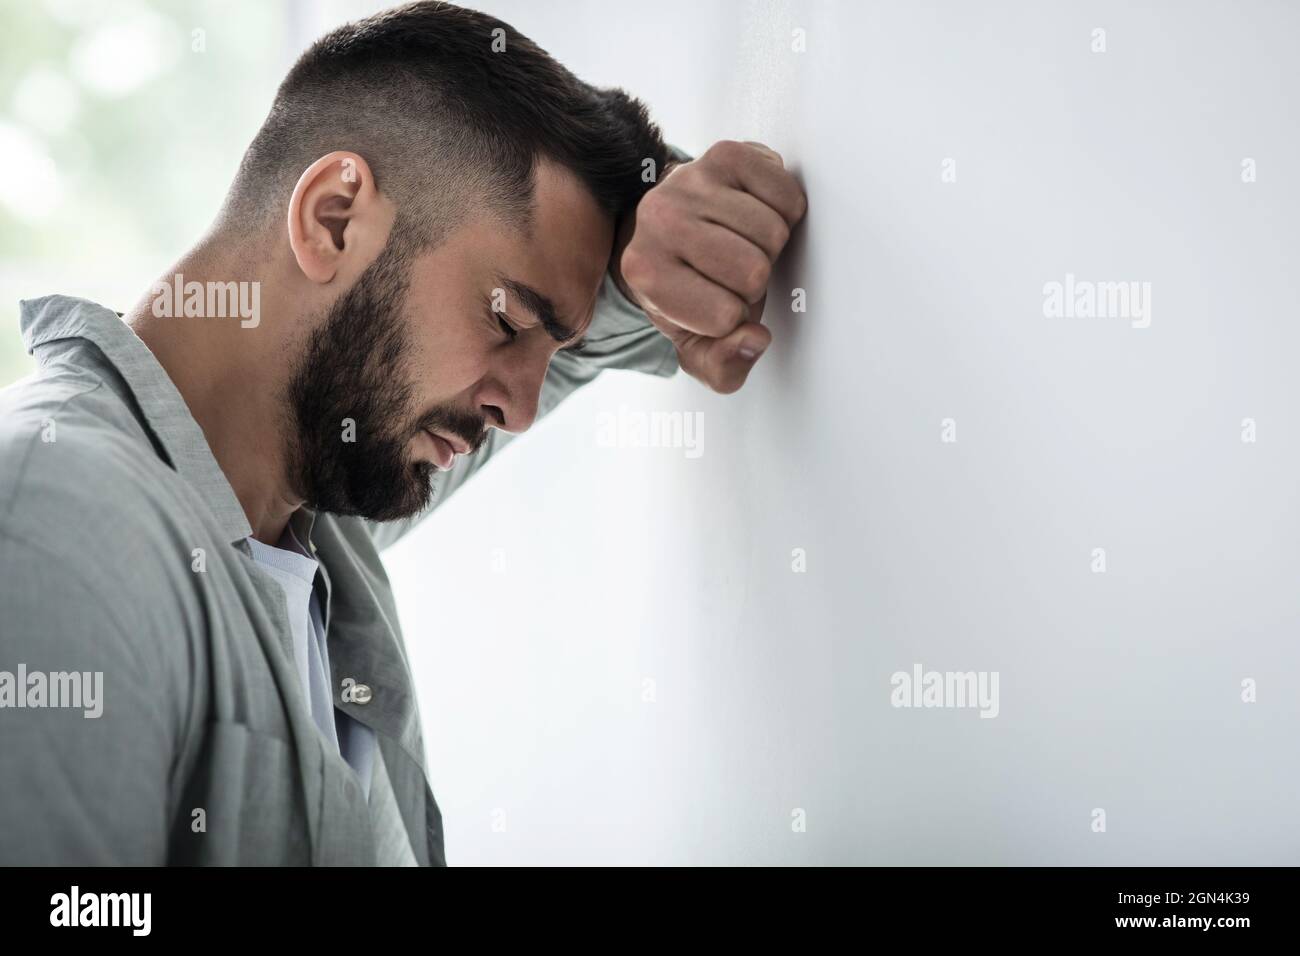 Stress, trouble, pain, depressed and mental health problems Stock Photo